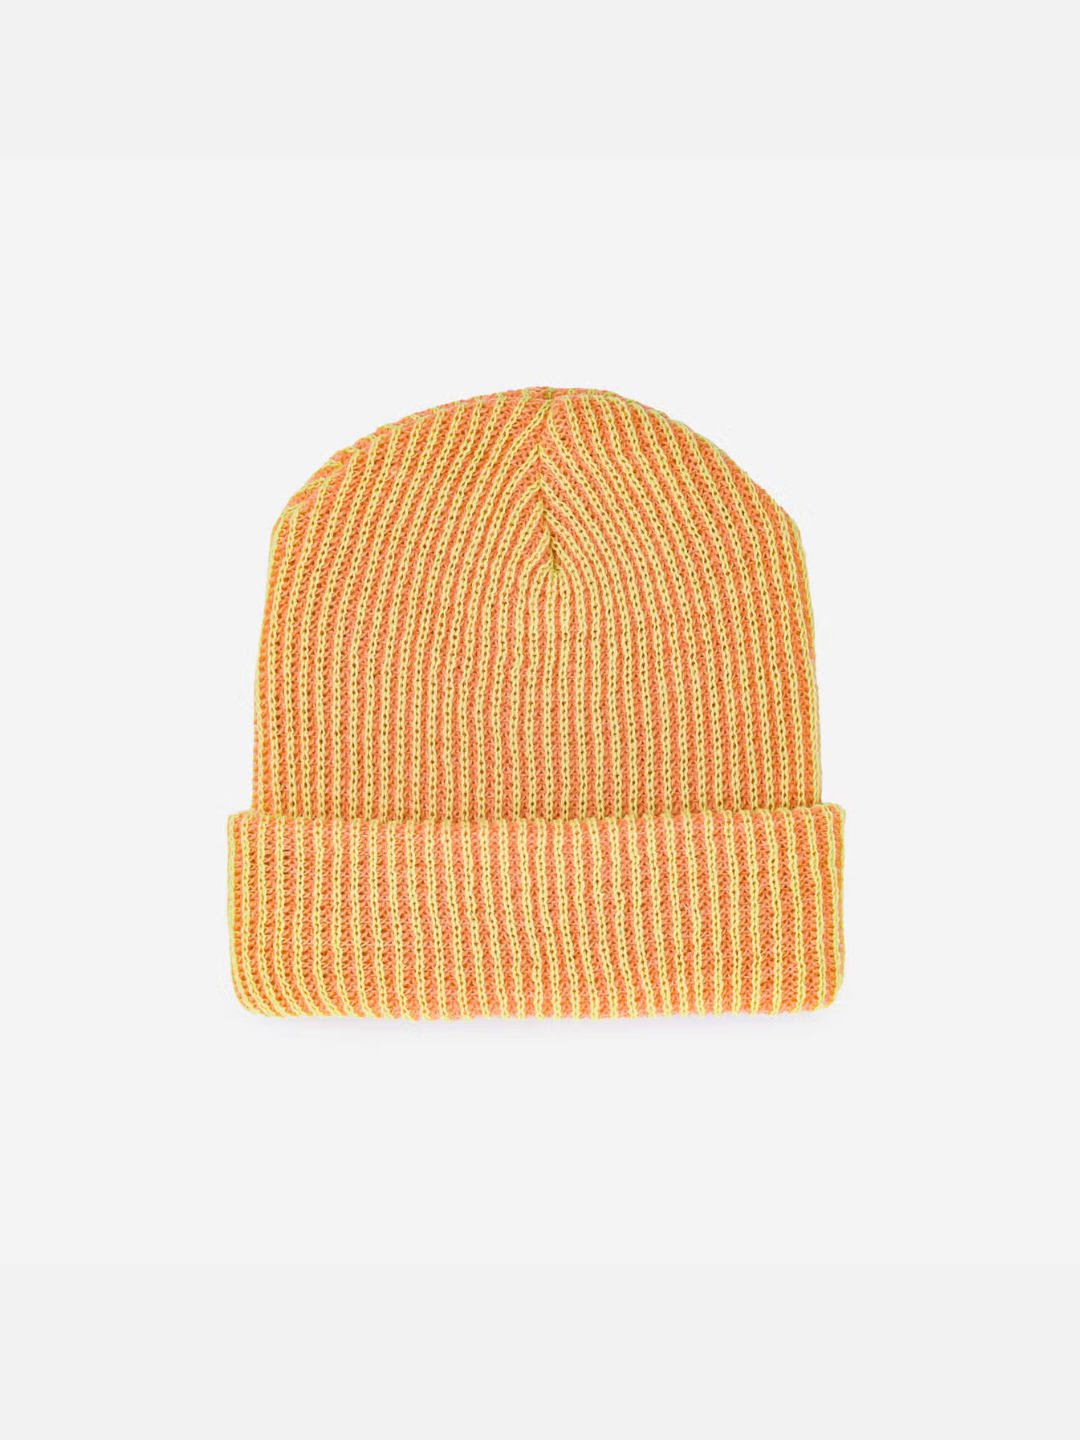 Peach/Lime | Front view of a peachy orange ribbed beanie for big kids and adults, with a ribbed cuff. The ribbed texture reveals a second yarn color that's yellow.